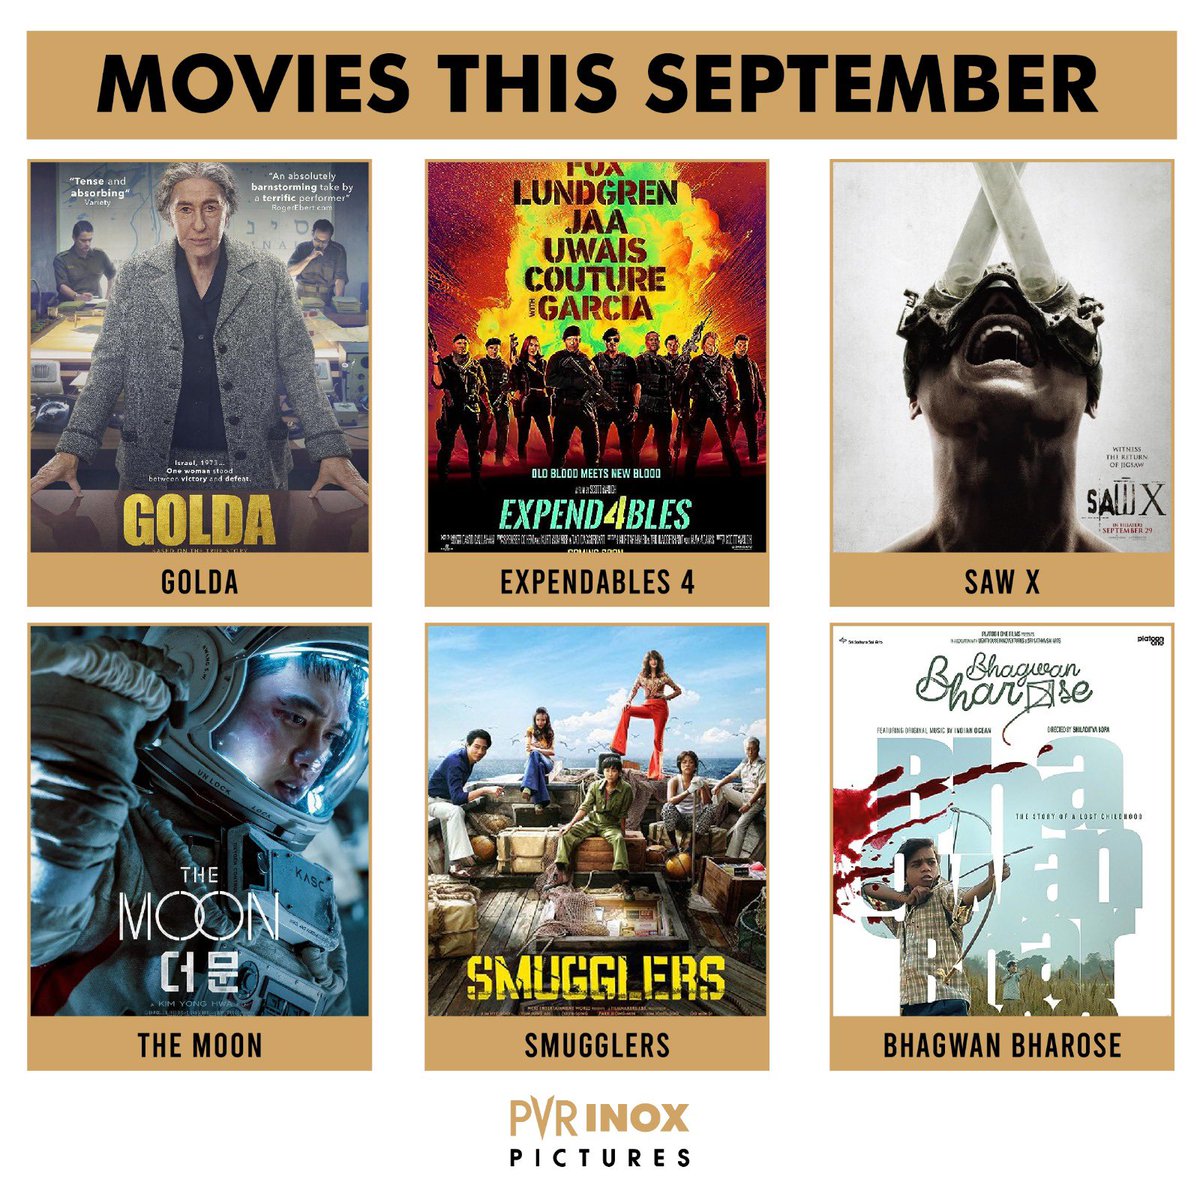 Prepare to have a blast with these exciting releases this September! 🔥🎬 Which movie are you most looking forward to? Comment and let us know. . . . #SeptemberReleases #Golda #Expendables4 #SawX #TheMoon #Smugglers #BhagwanBharose #PVRINOXPictures @LionsgateIndia @MVPIndia